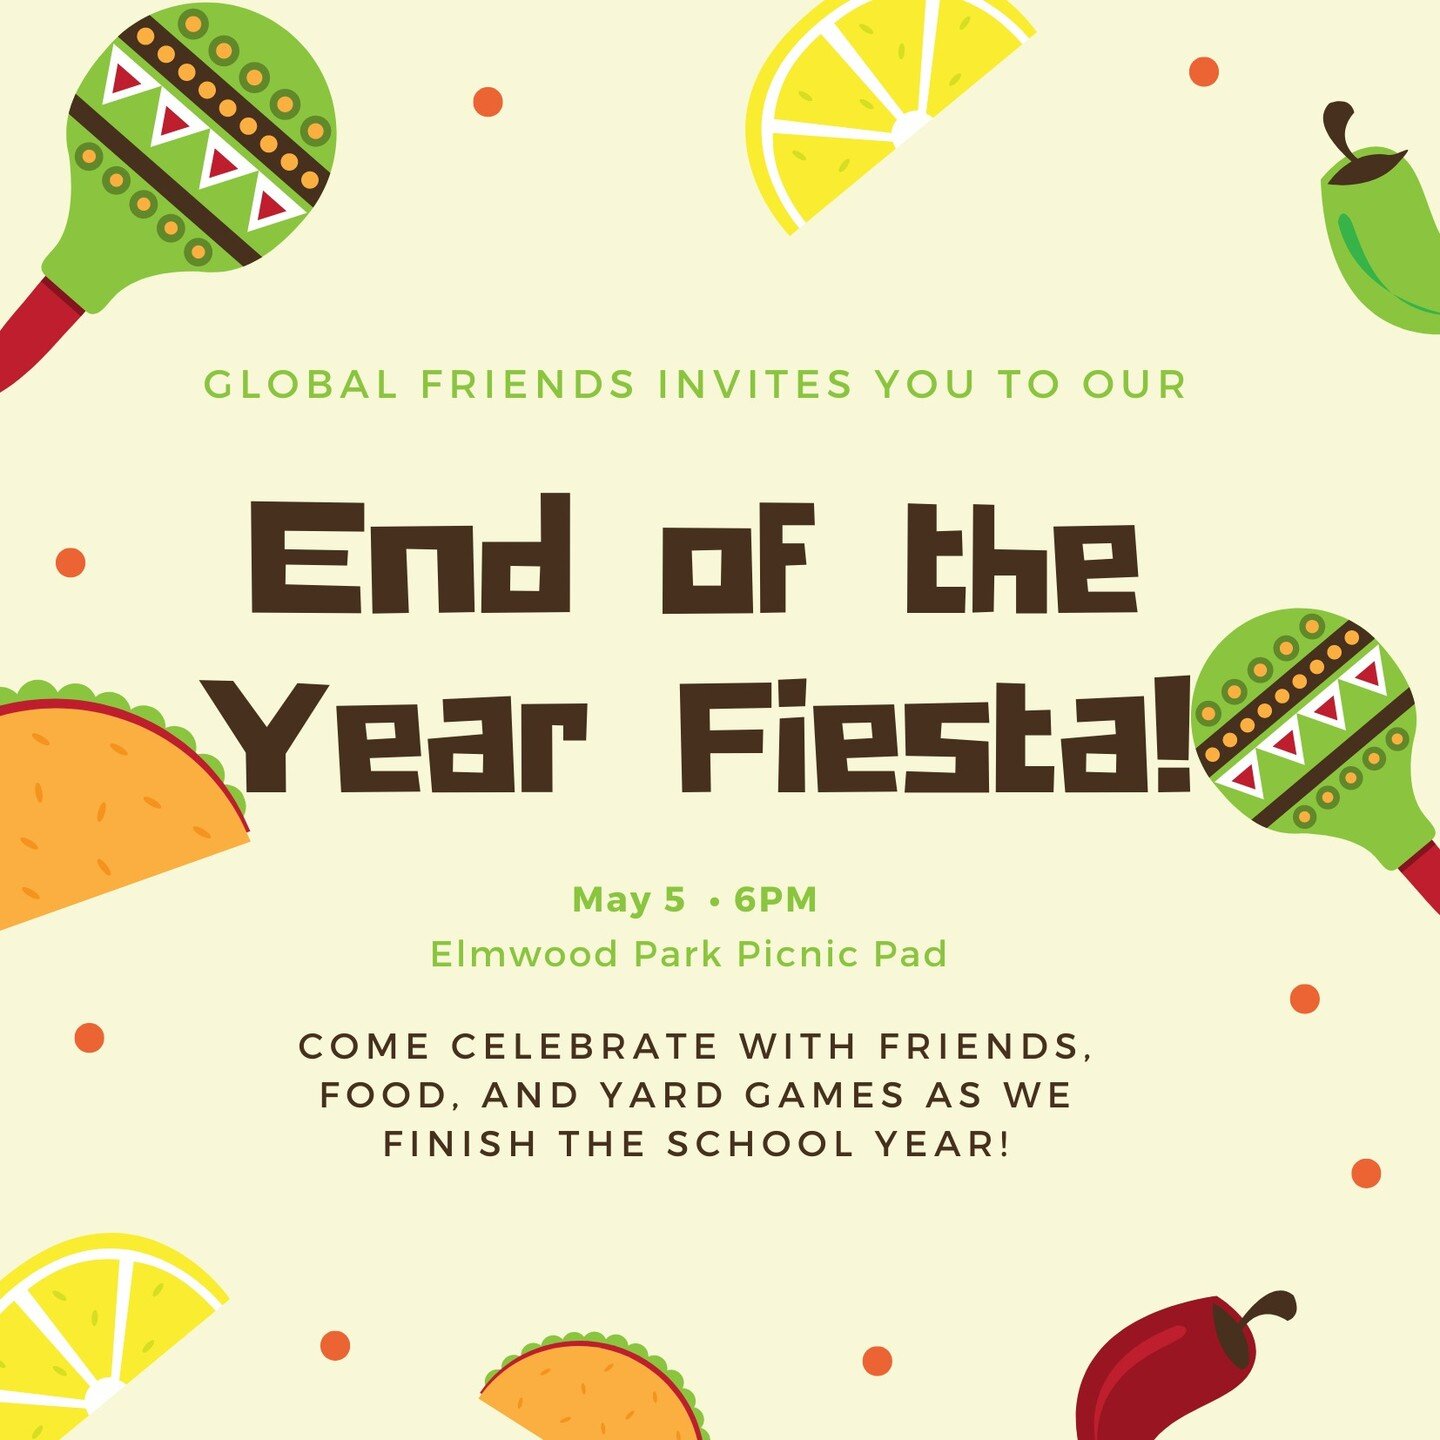 hola, friends!! 👋

What better way to celebrate Cinco de Mayo this Friday than to have fun with friends with yard games and good food?! 🎉

The semester is coming to a close (saaad), so we want to honor the friendships we have made this past school 